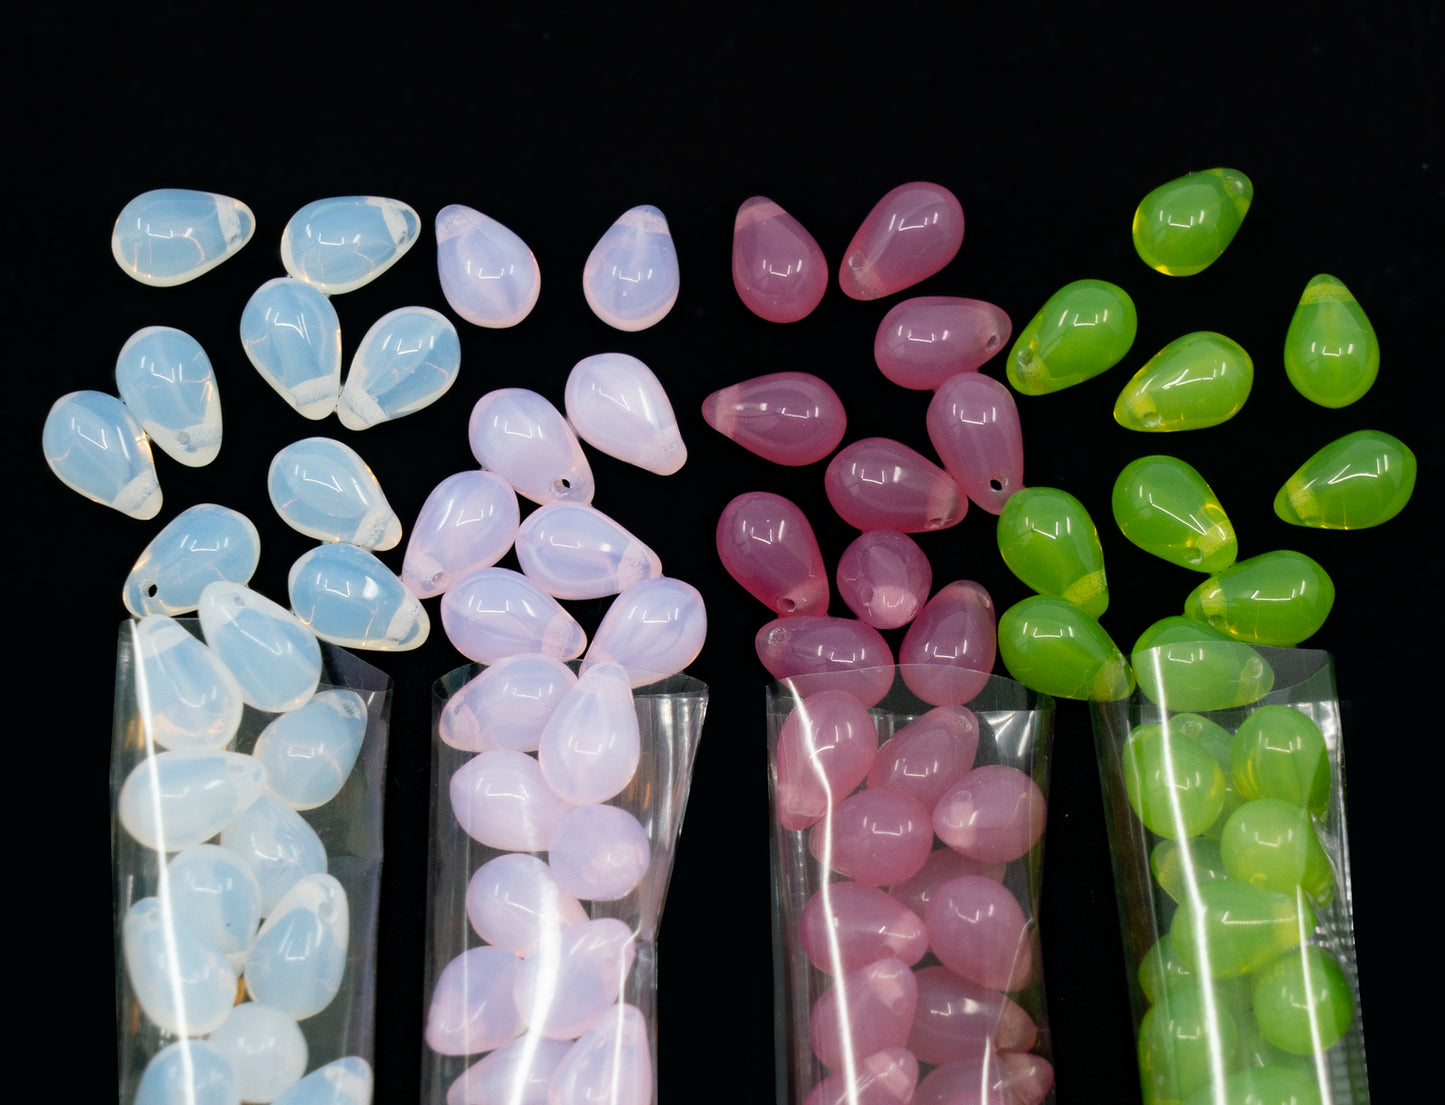 120+ Bead Kit of 6x9mm Pendant Drop Beads - Teardrop Glass Beads for Jewelry Making Set in 4 Opal Colors: White, Pink, Dark Pink, Grass Green